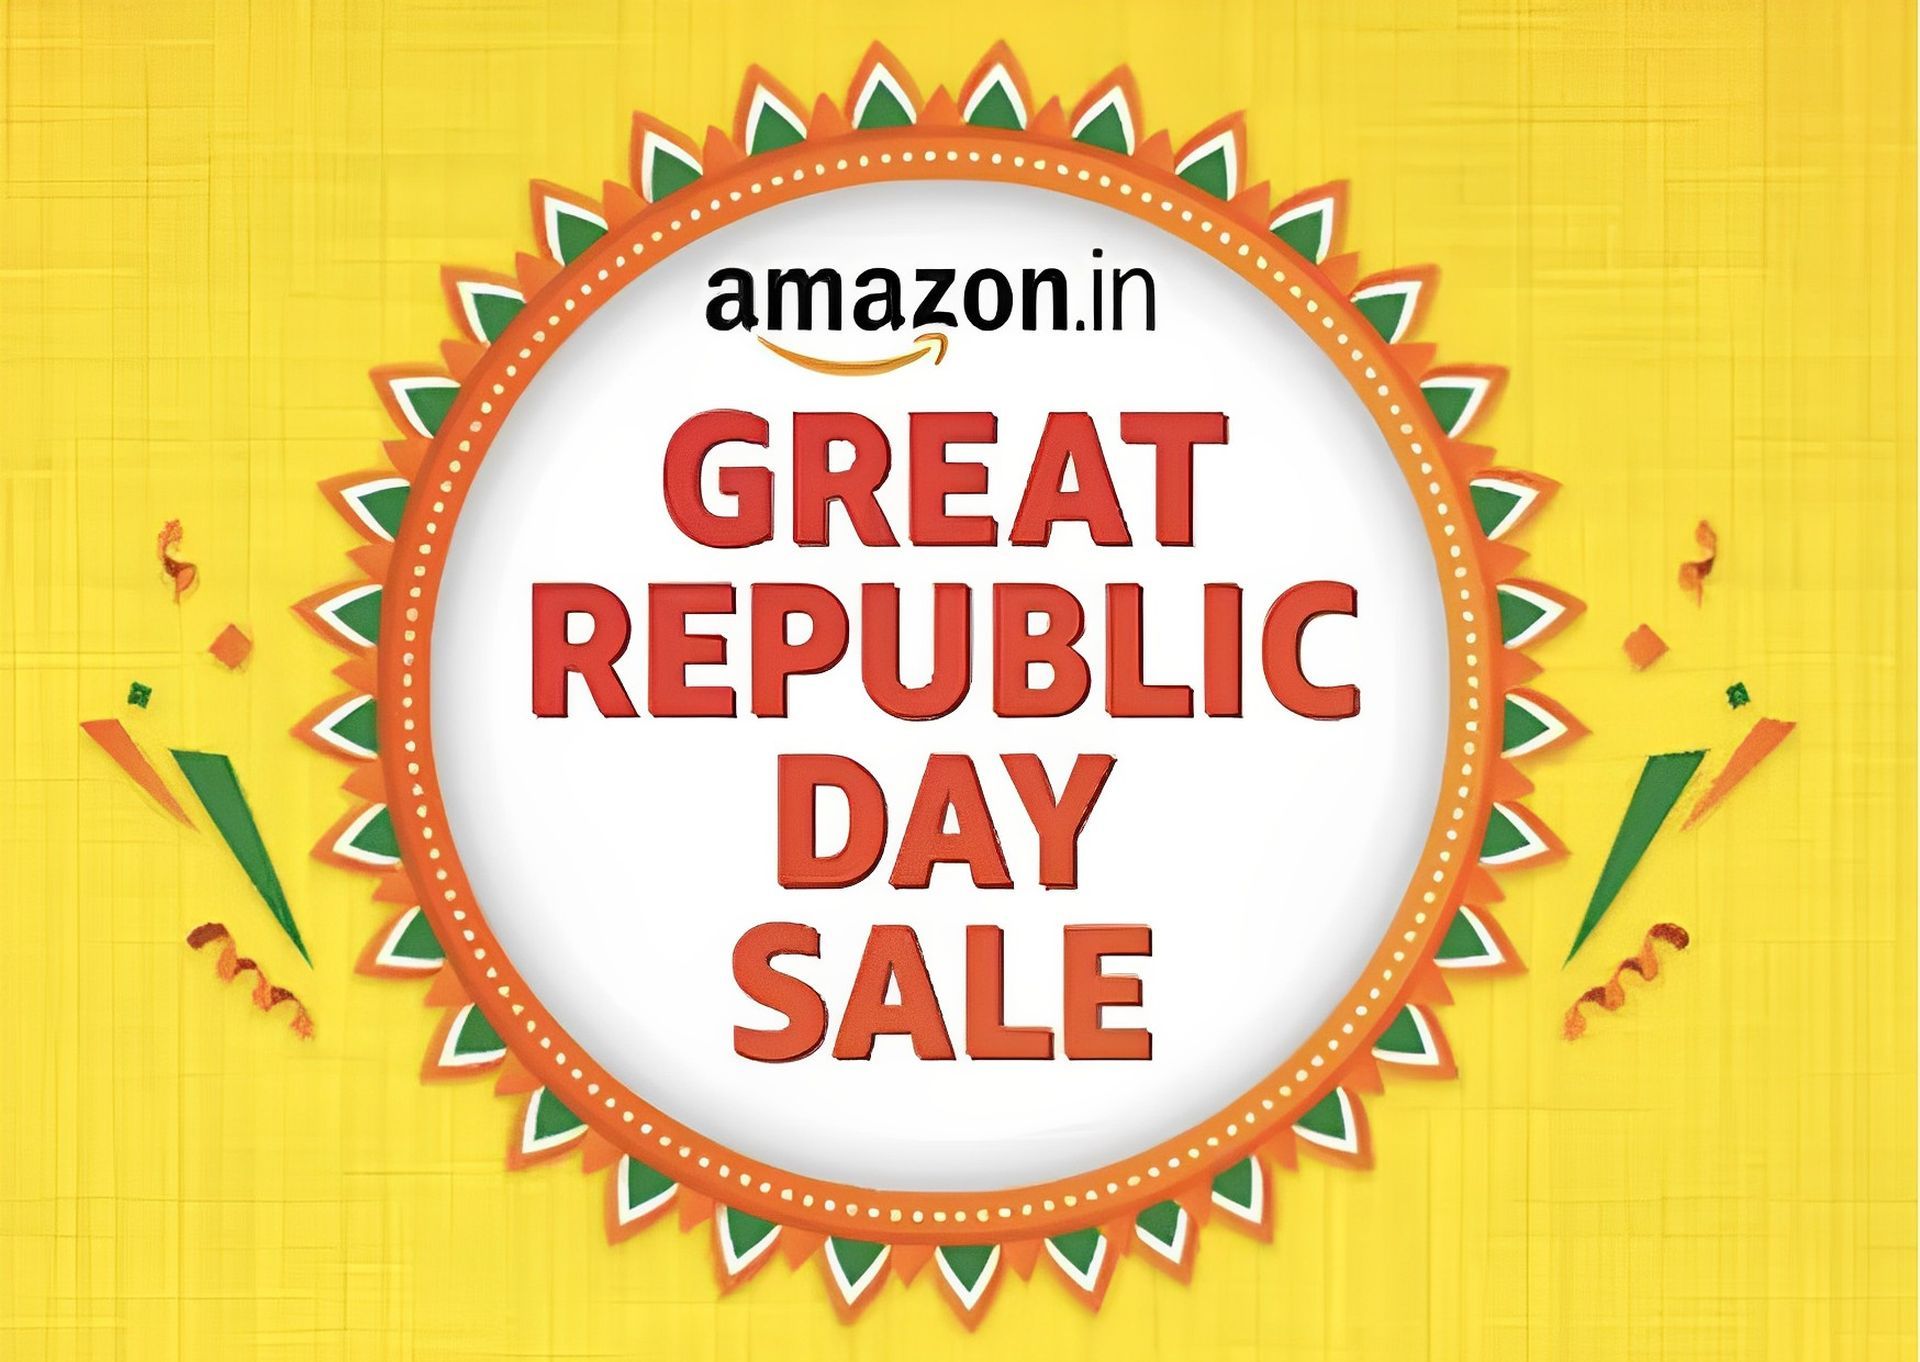 Amazon Great Republic Day sale offers